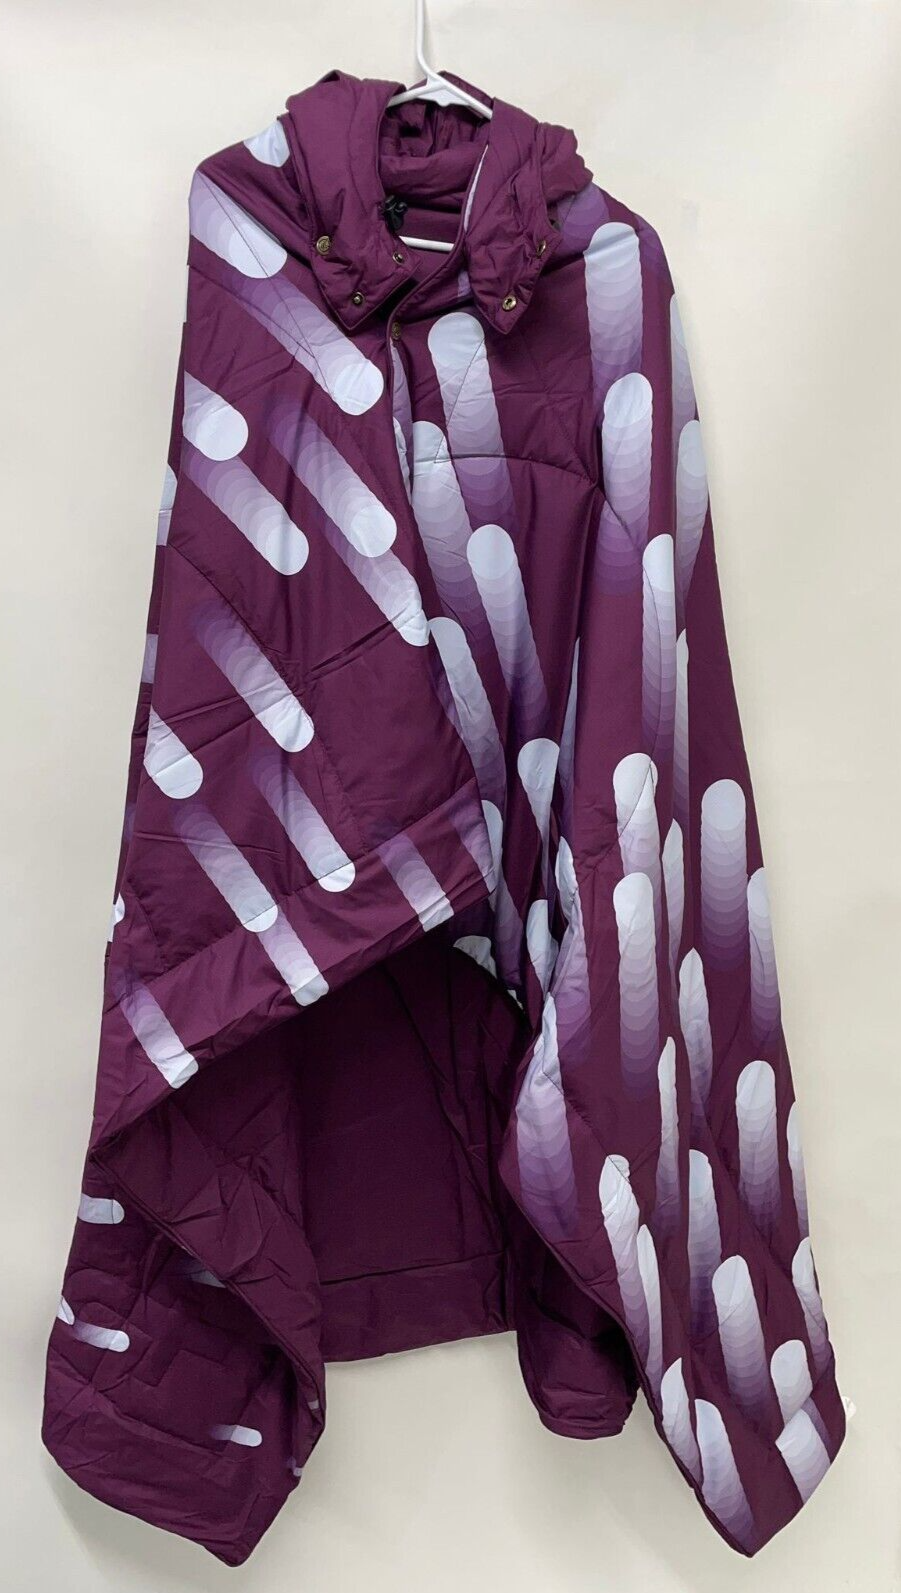 Voited Recycled Ripstop Travel Blanket 50x70 Wearable Camping Clevertech Purple